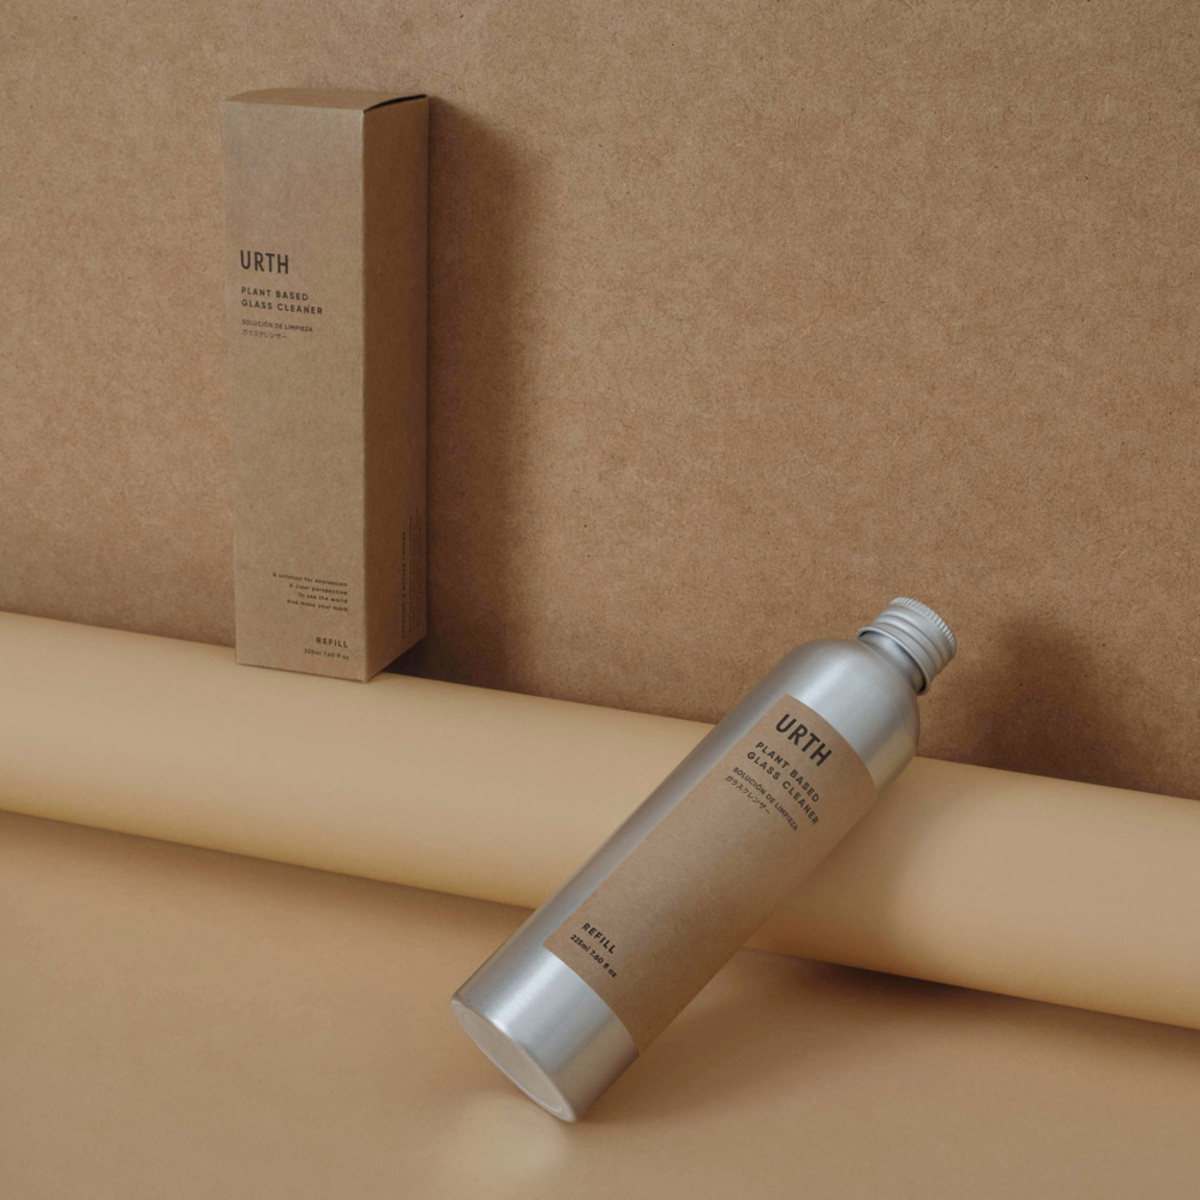 Urth Glass Cleaning Spray Refill